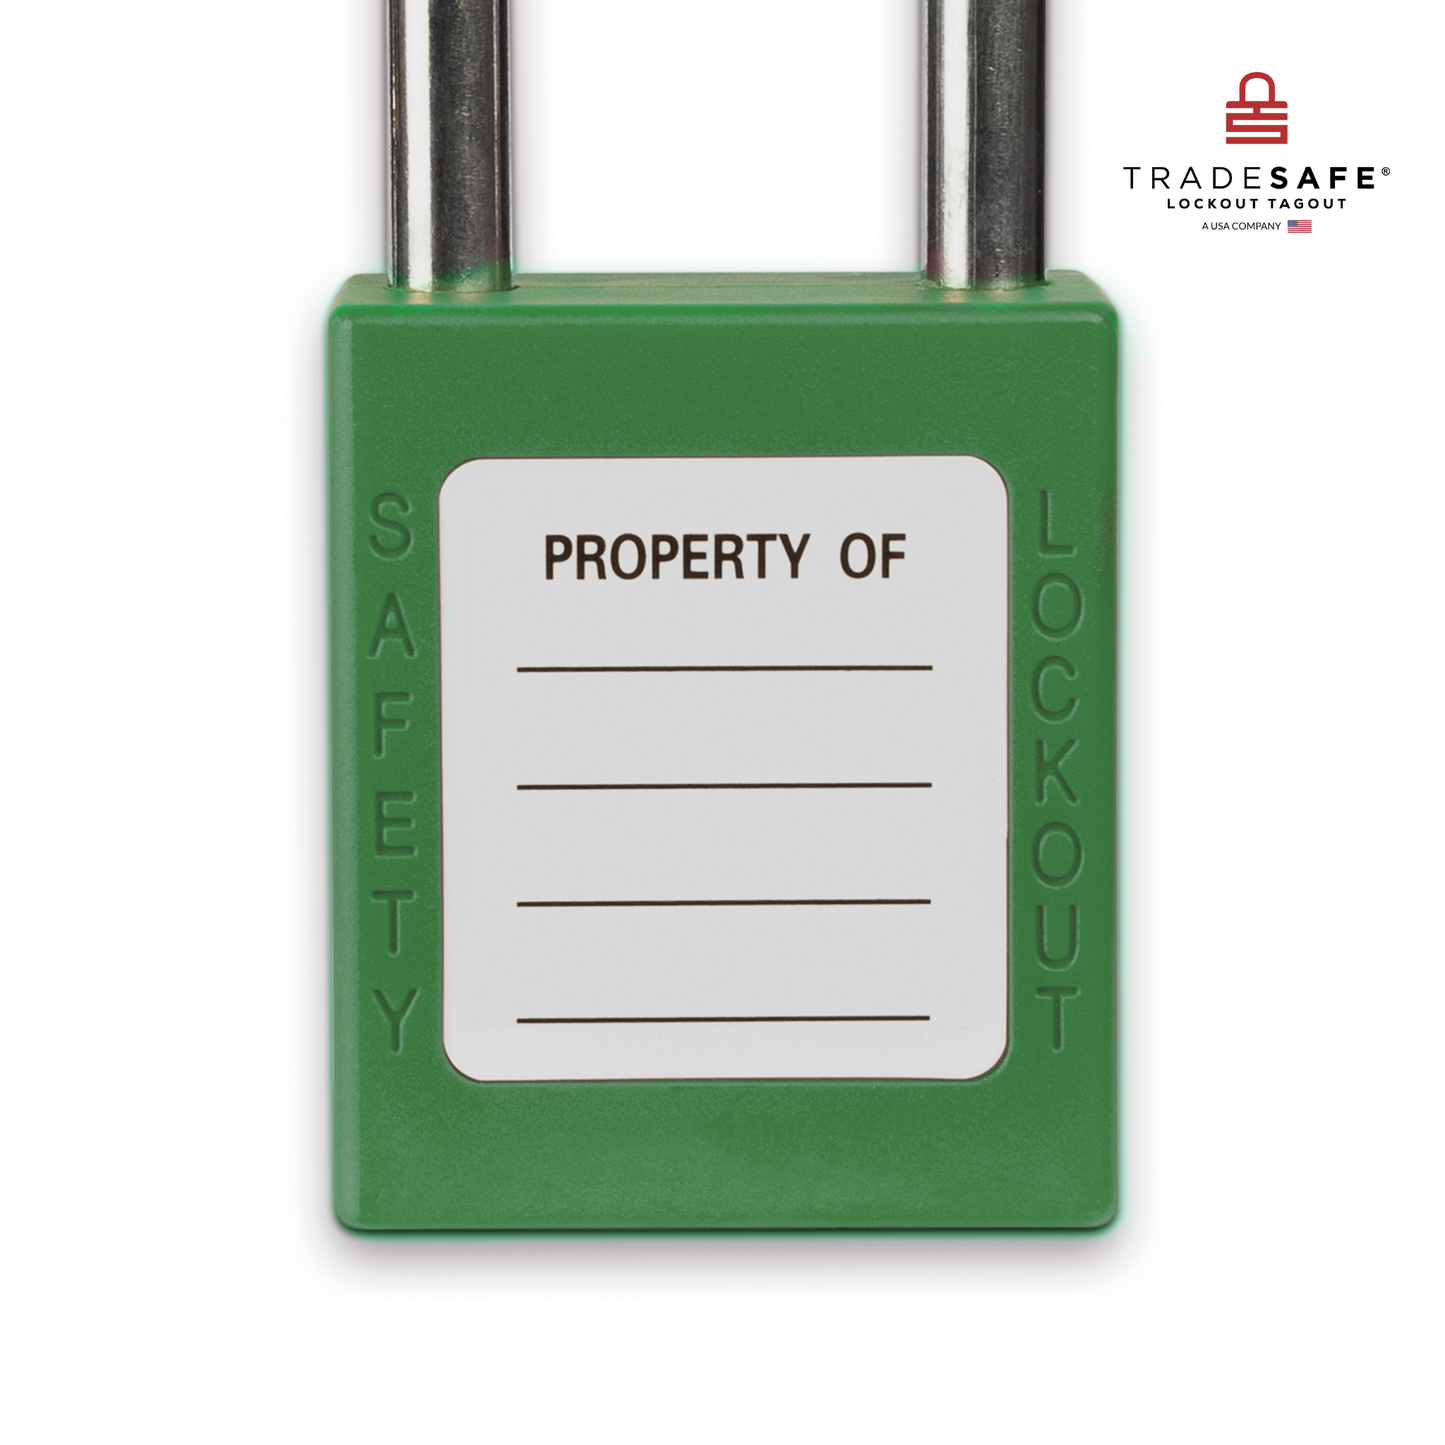 close-up view of the writable area at the back of the green loto padlock's body 